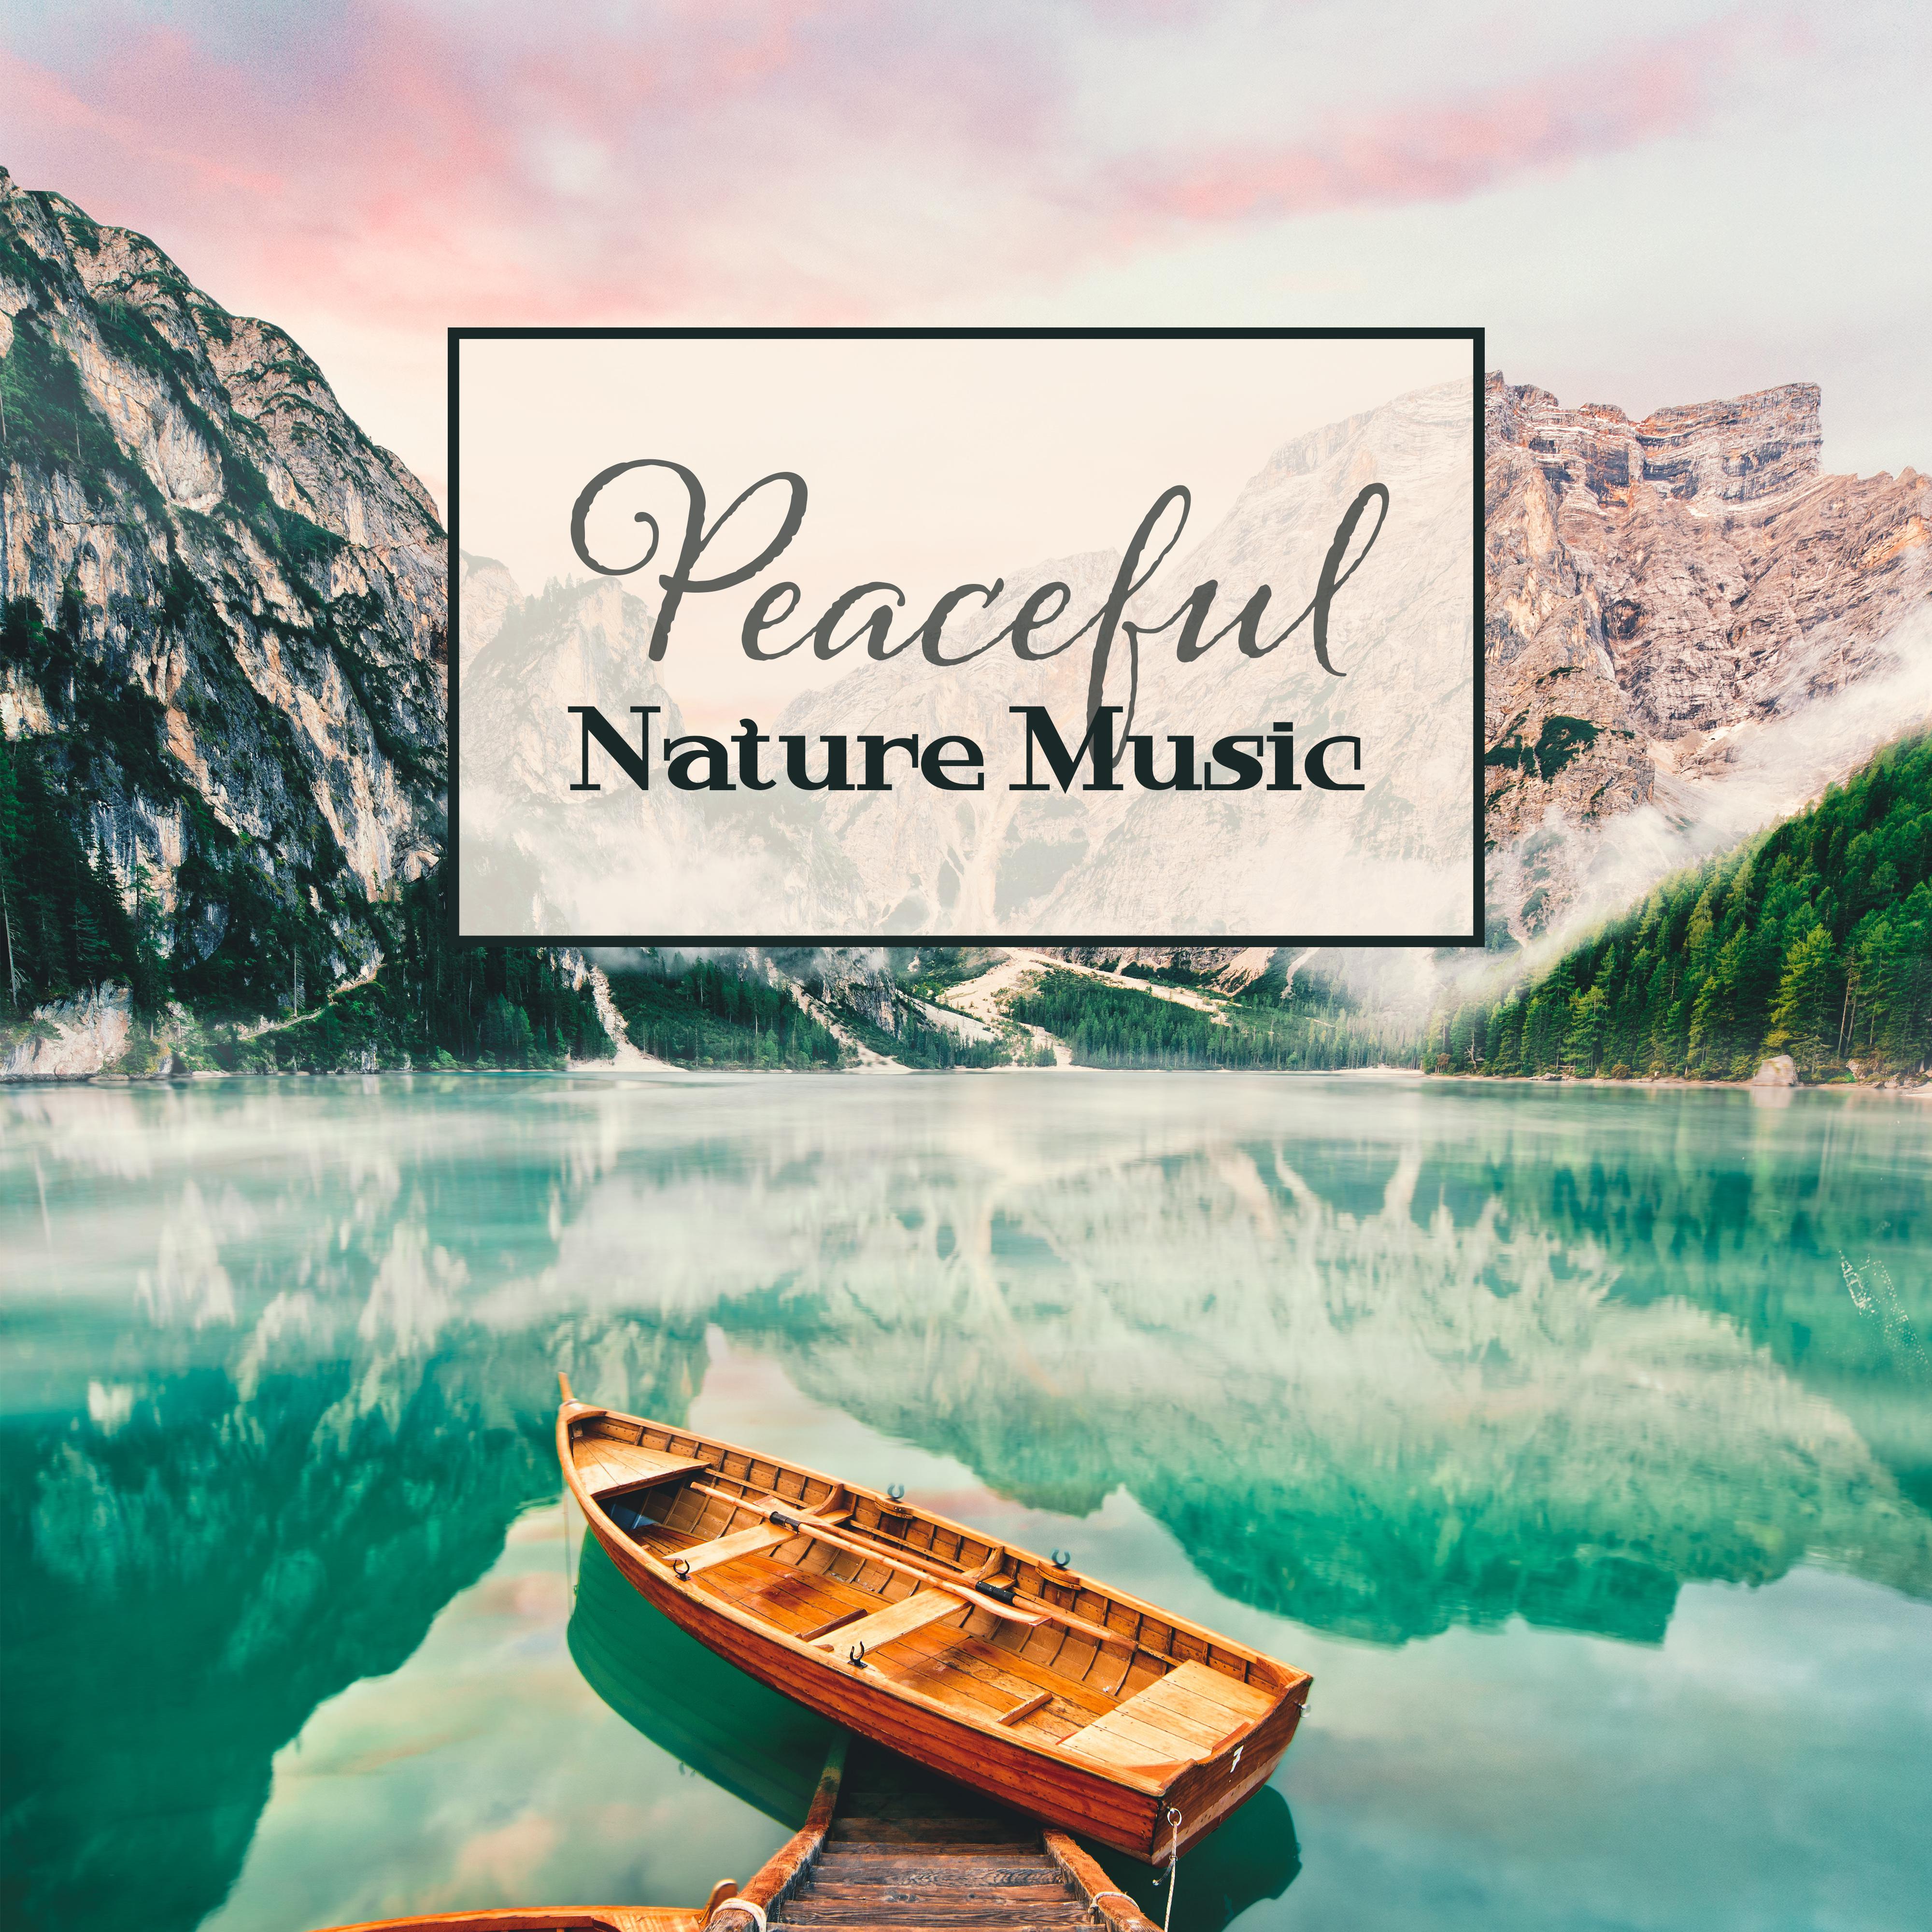 Peaceful Nature Music  Easy Listening, Nature Relaxation, Time to Rest, Healing Therapy